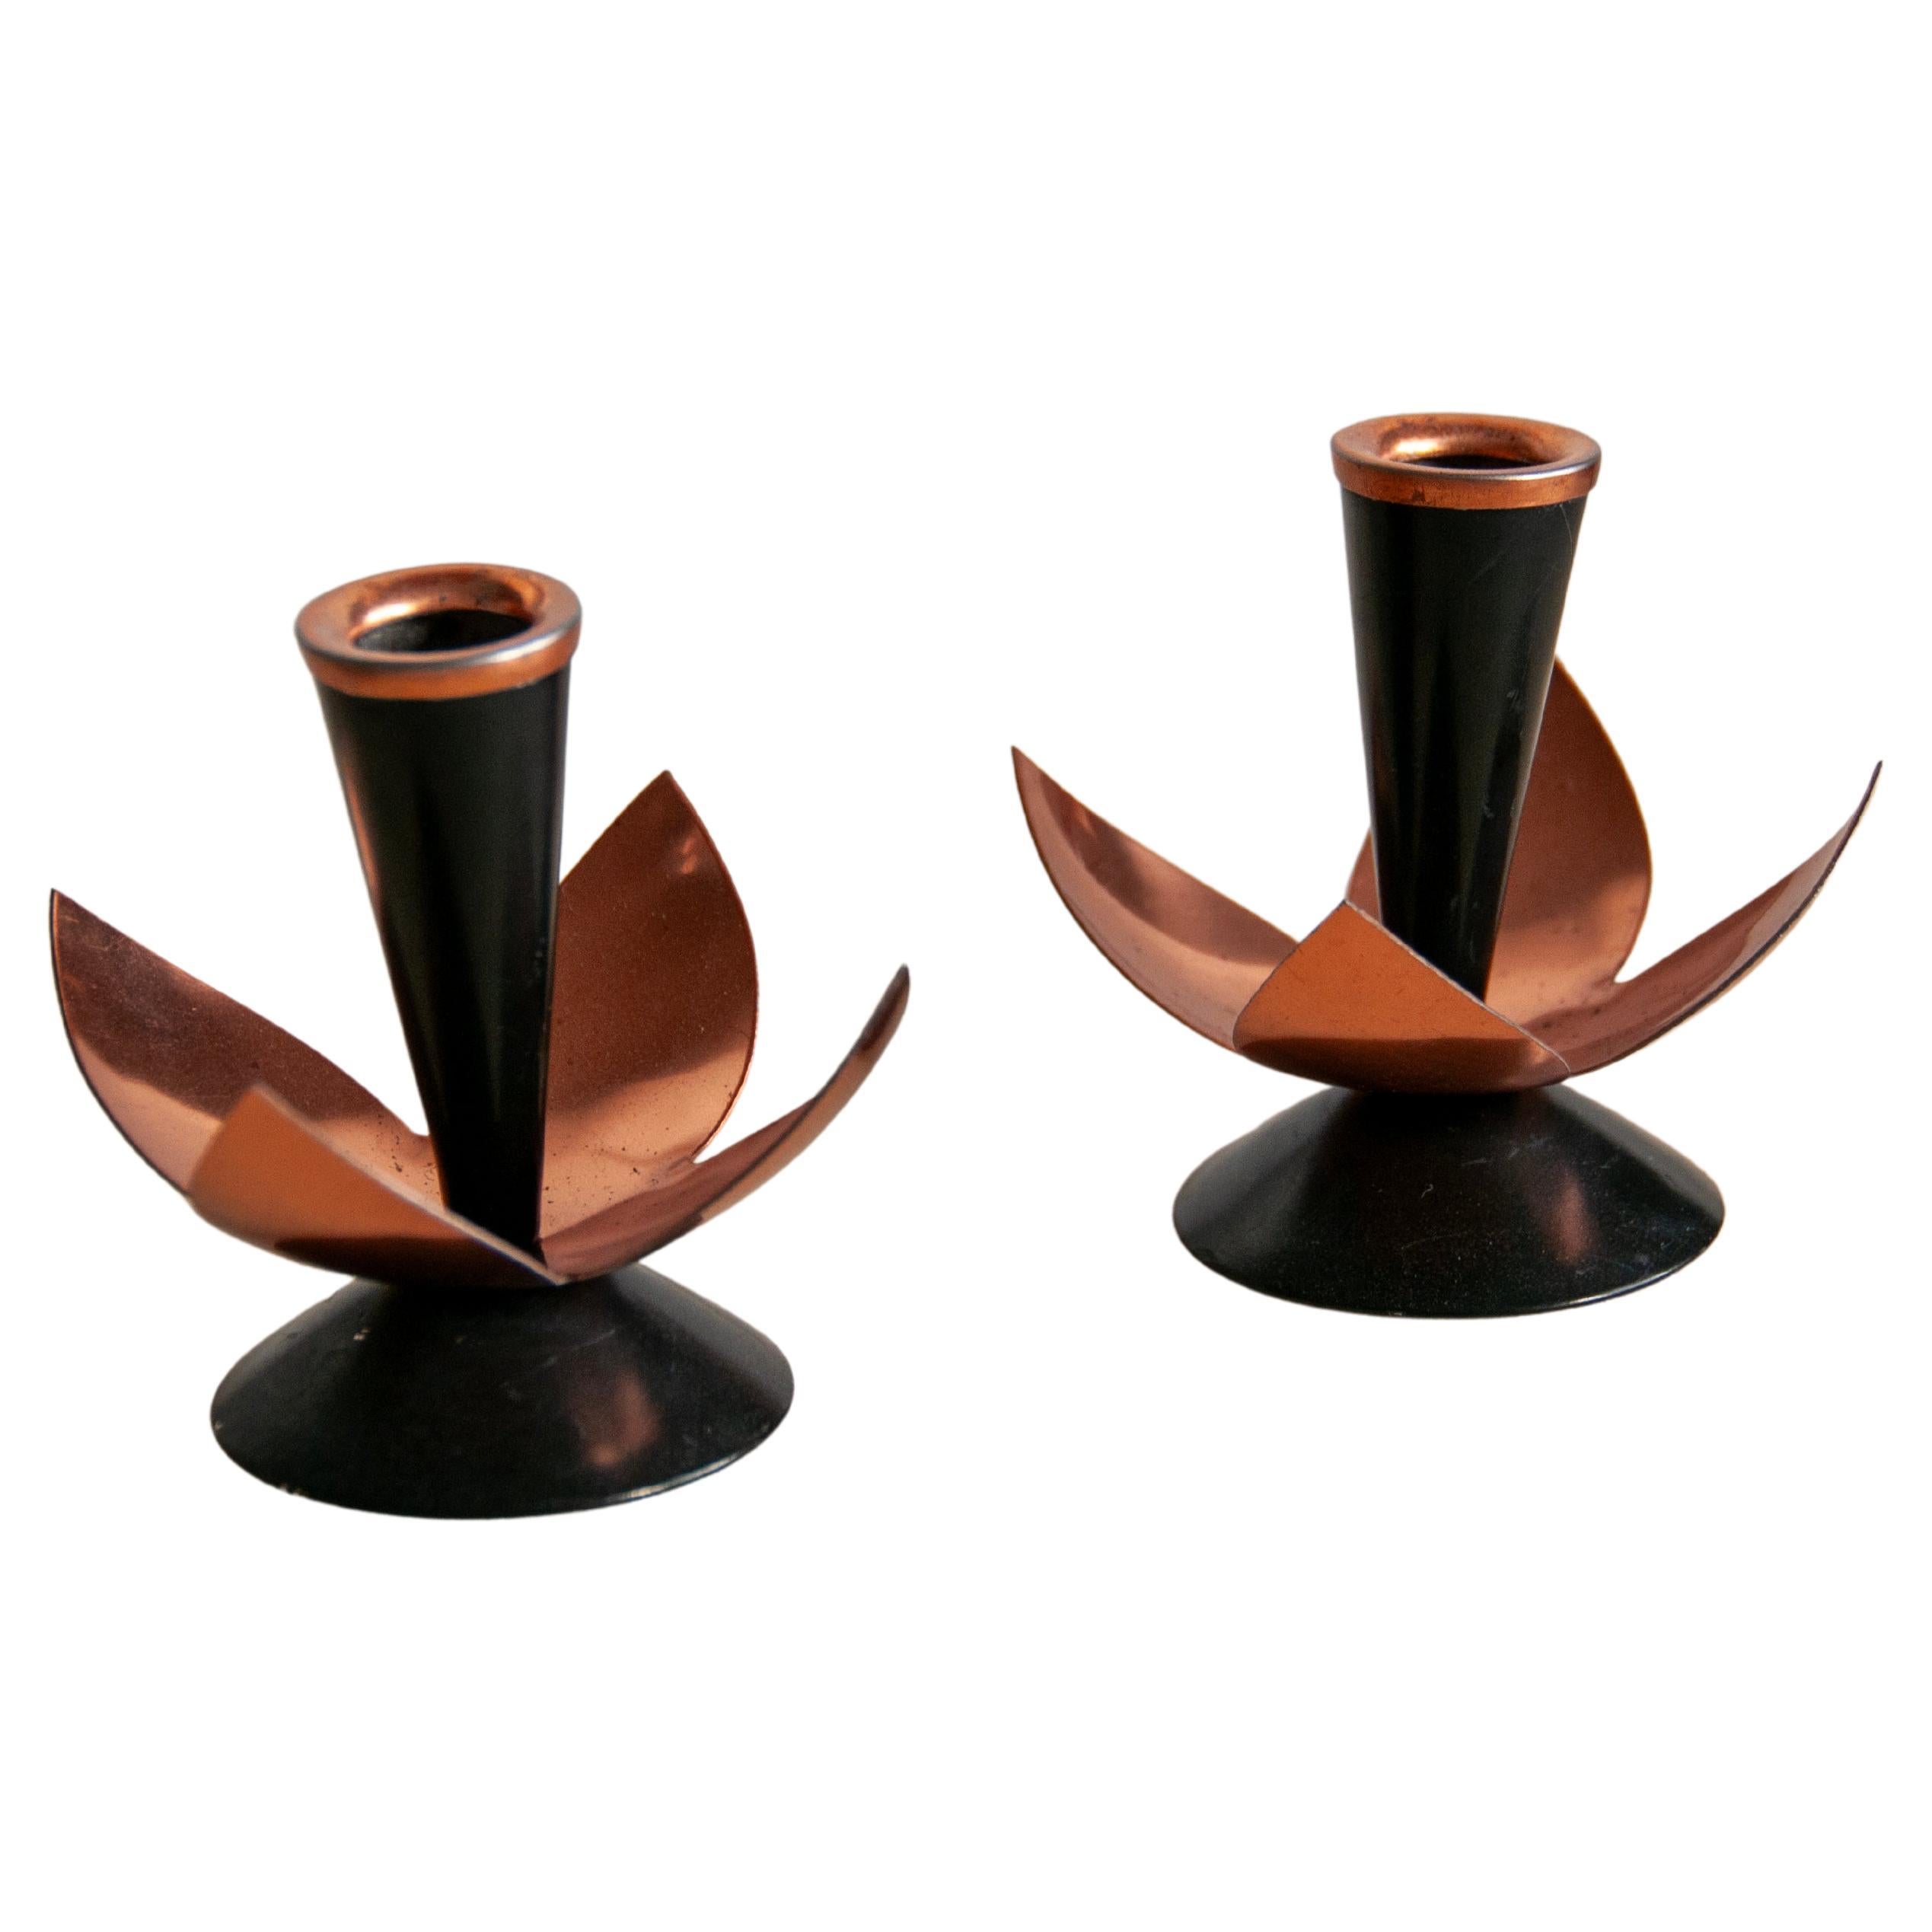 Copper and Black Metal candle Holders from Sweden, 1950s